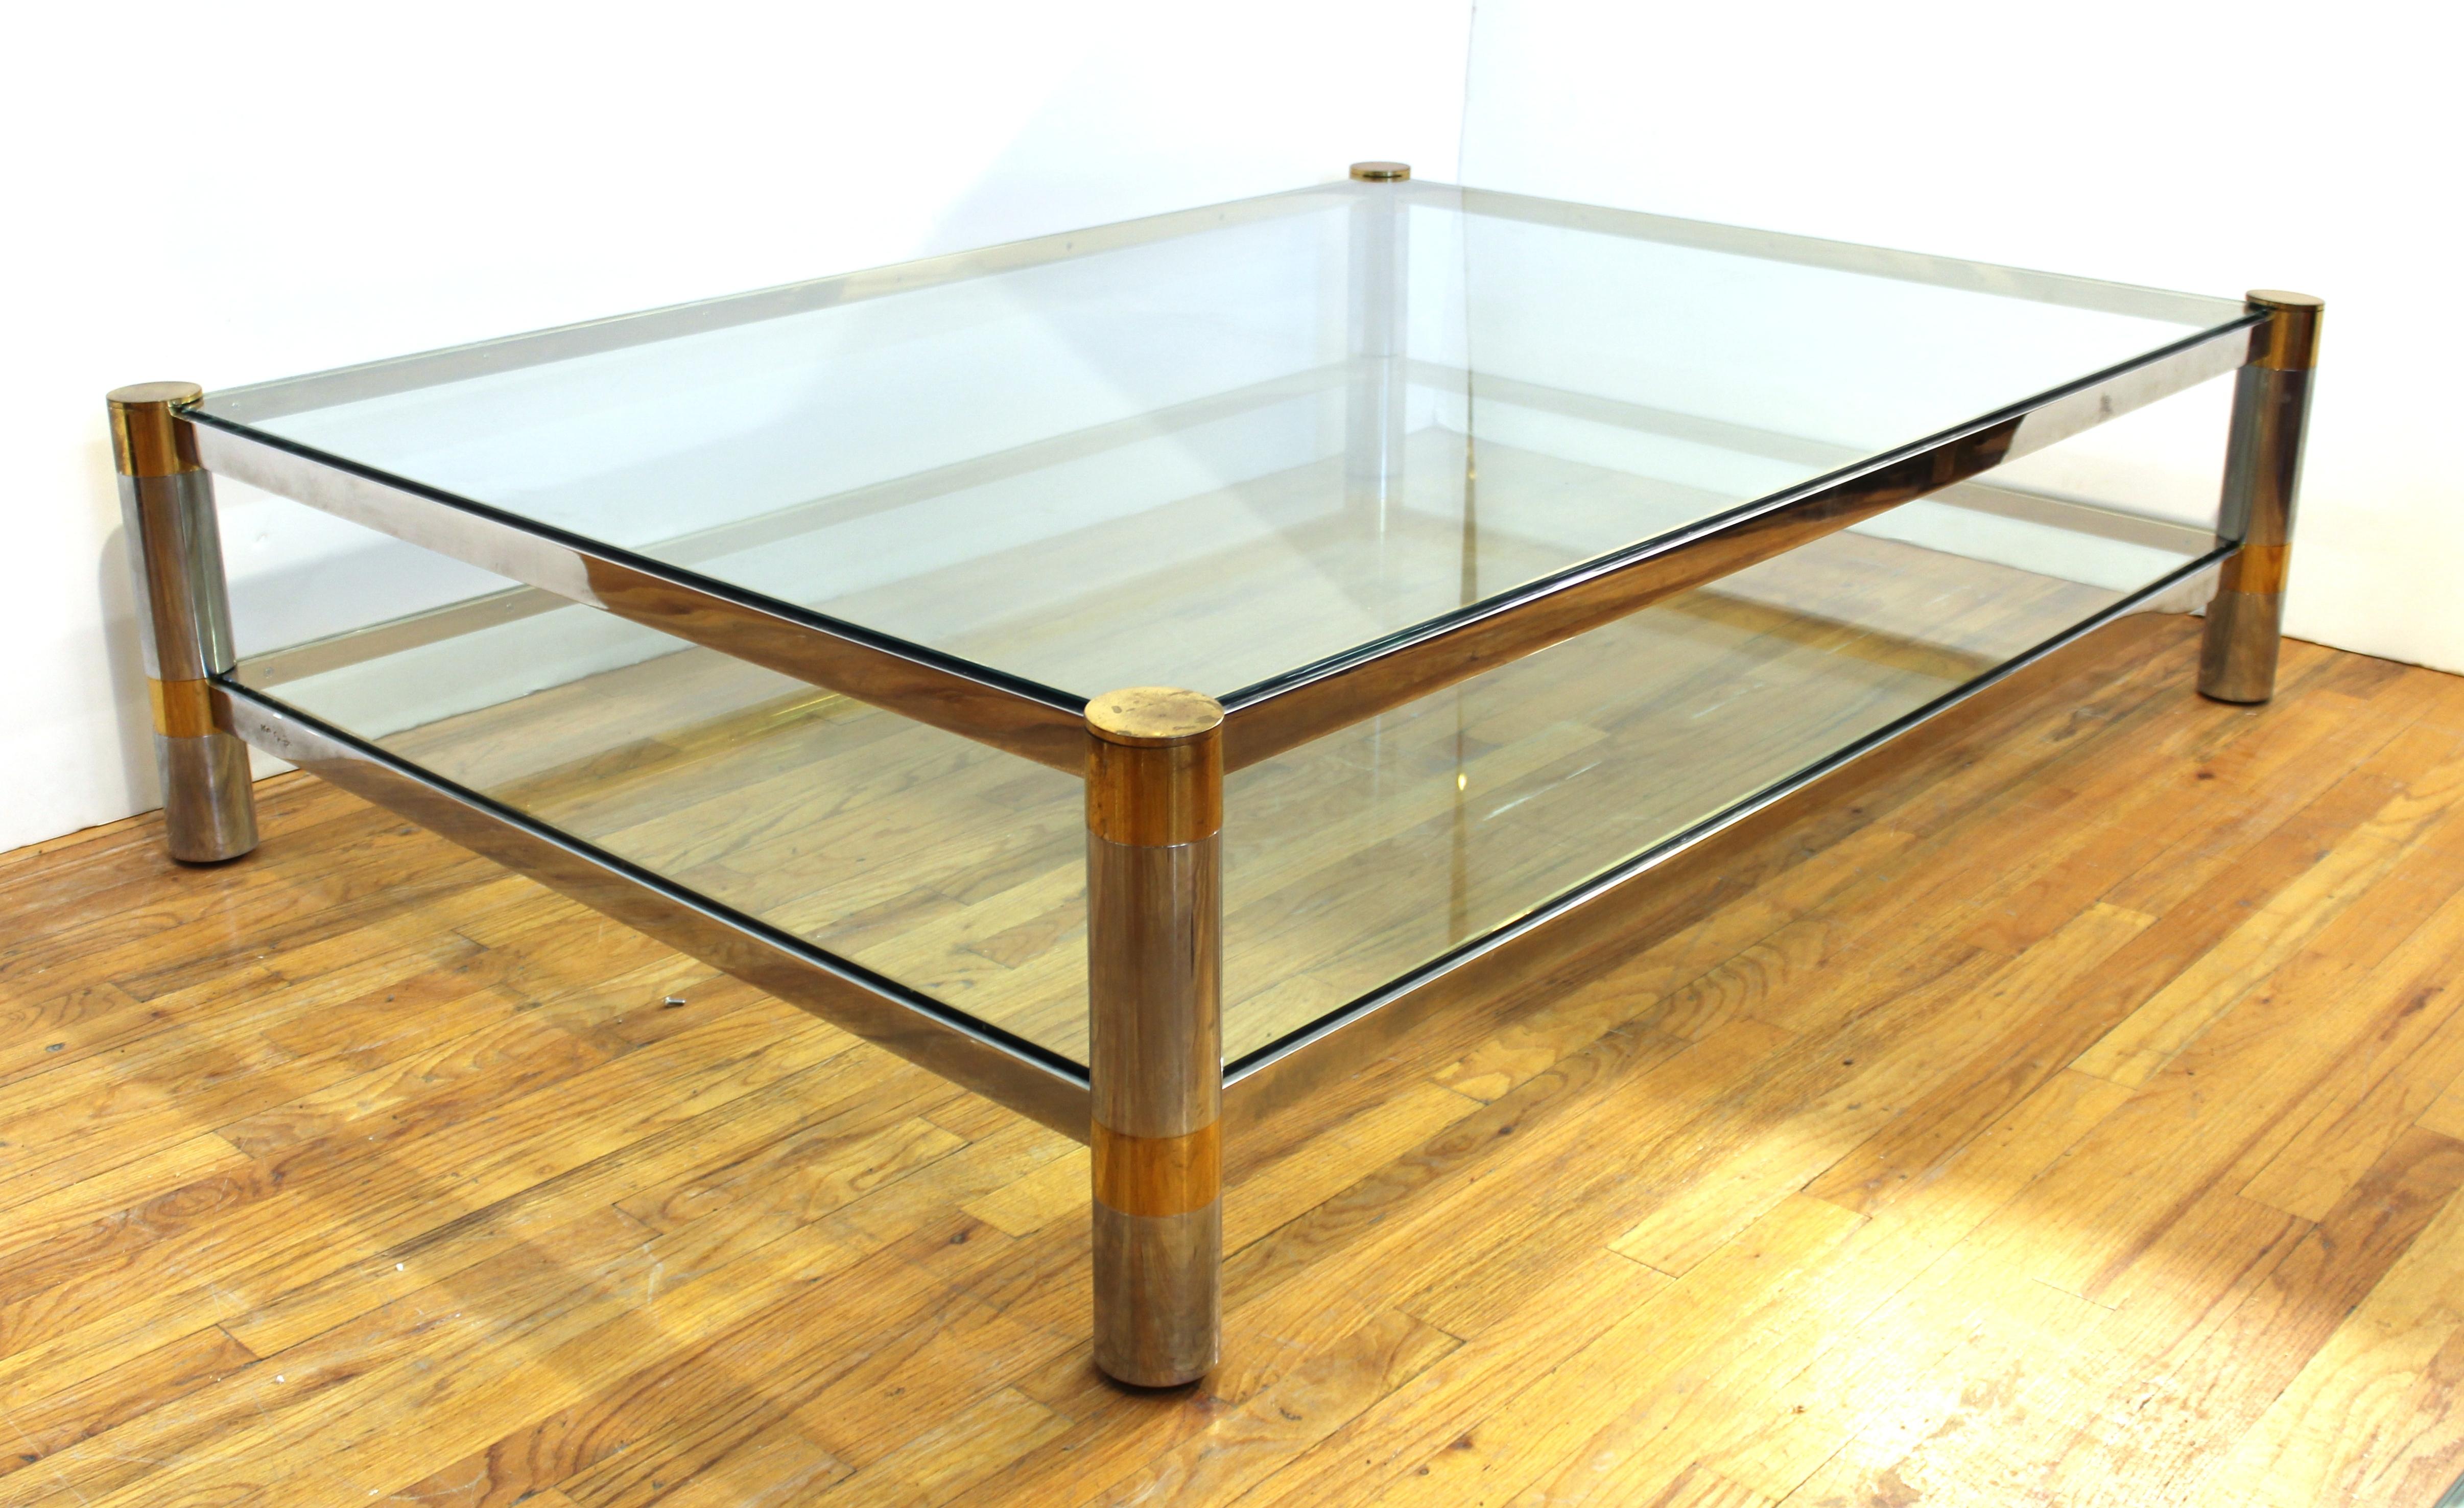 American Modern cocktail or coffee table of monumental proportions, designed by Karl Springer in the 1970s. The piece has a nickel and brass structure and two heavy glass tiers. Signed 'Karl Springer' on one of the sides. In great vintage condition